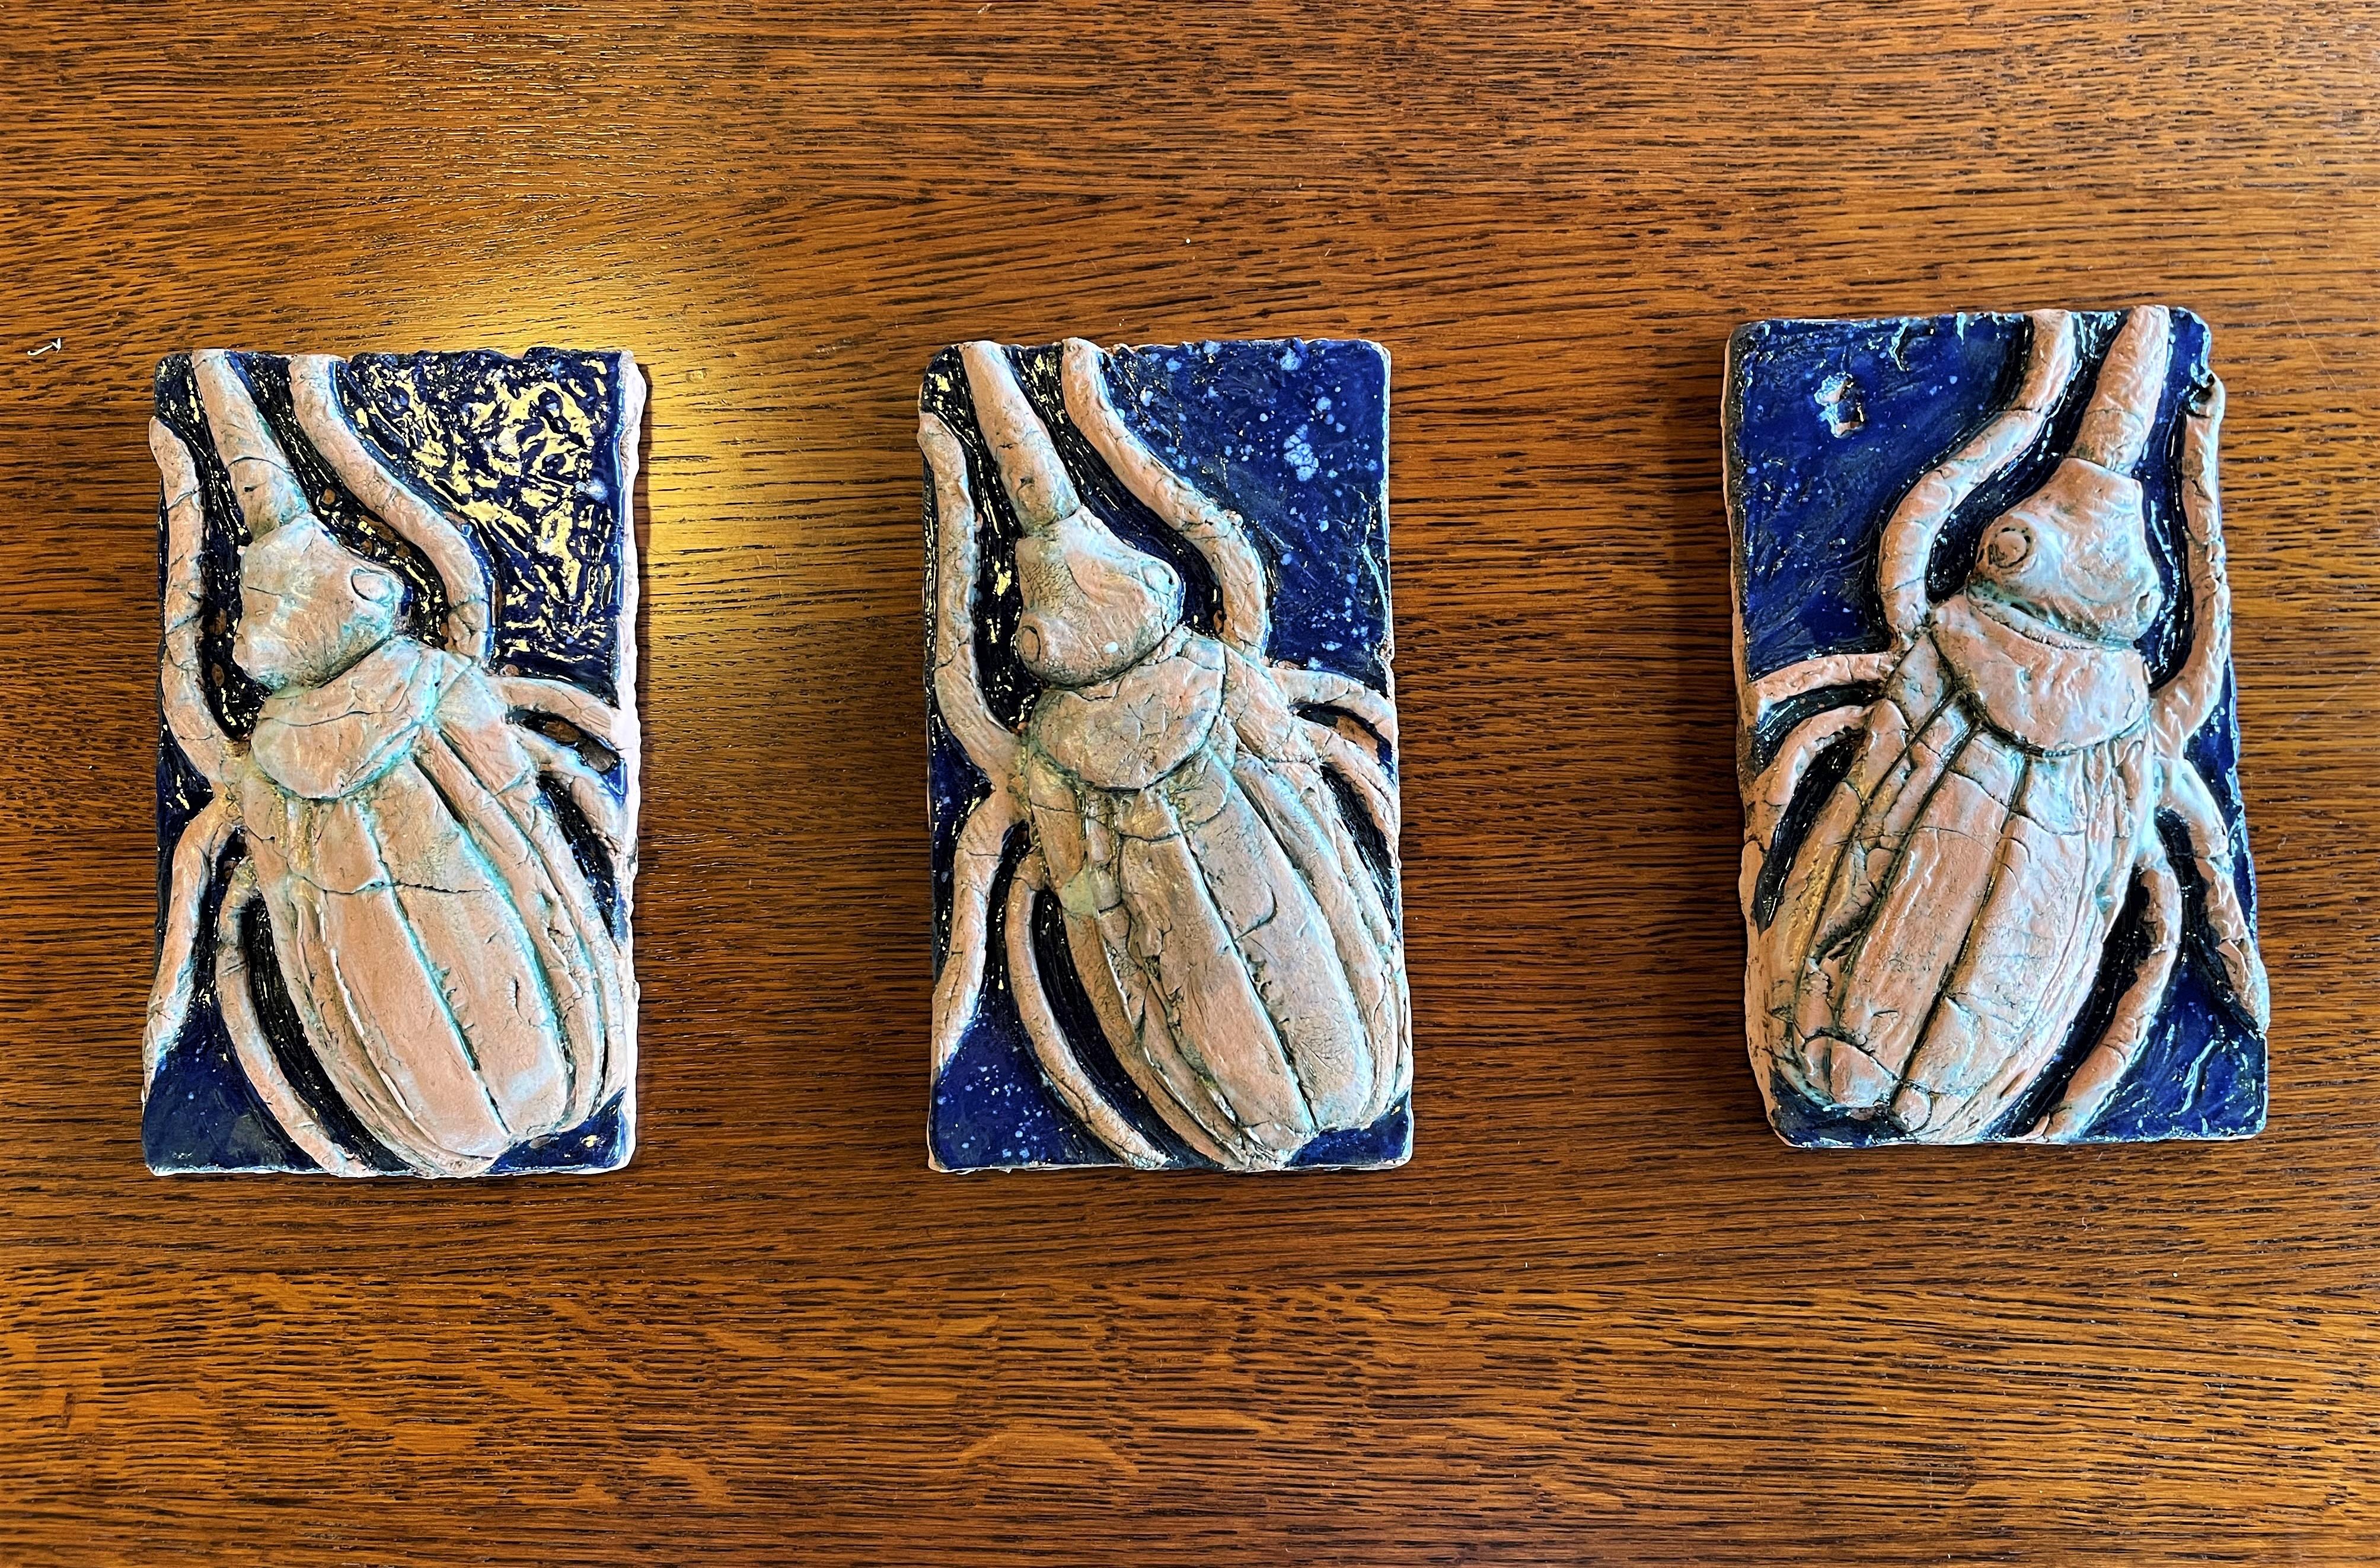 If you love scarabs, this set of 3 hand-crafted bas-relief ceramic tiles would make a unique addition to your collection. You won't find another like it! That they are a set of three makes them versatile as wall-tile accents or incorporated into a